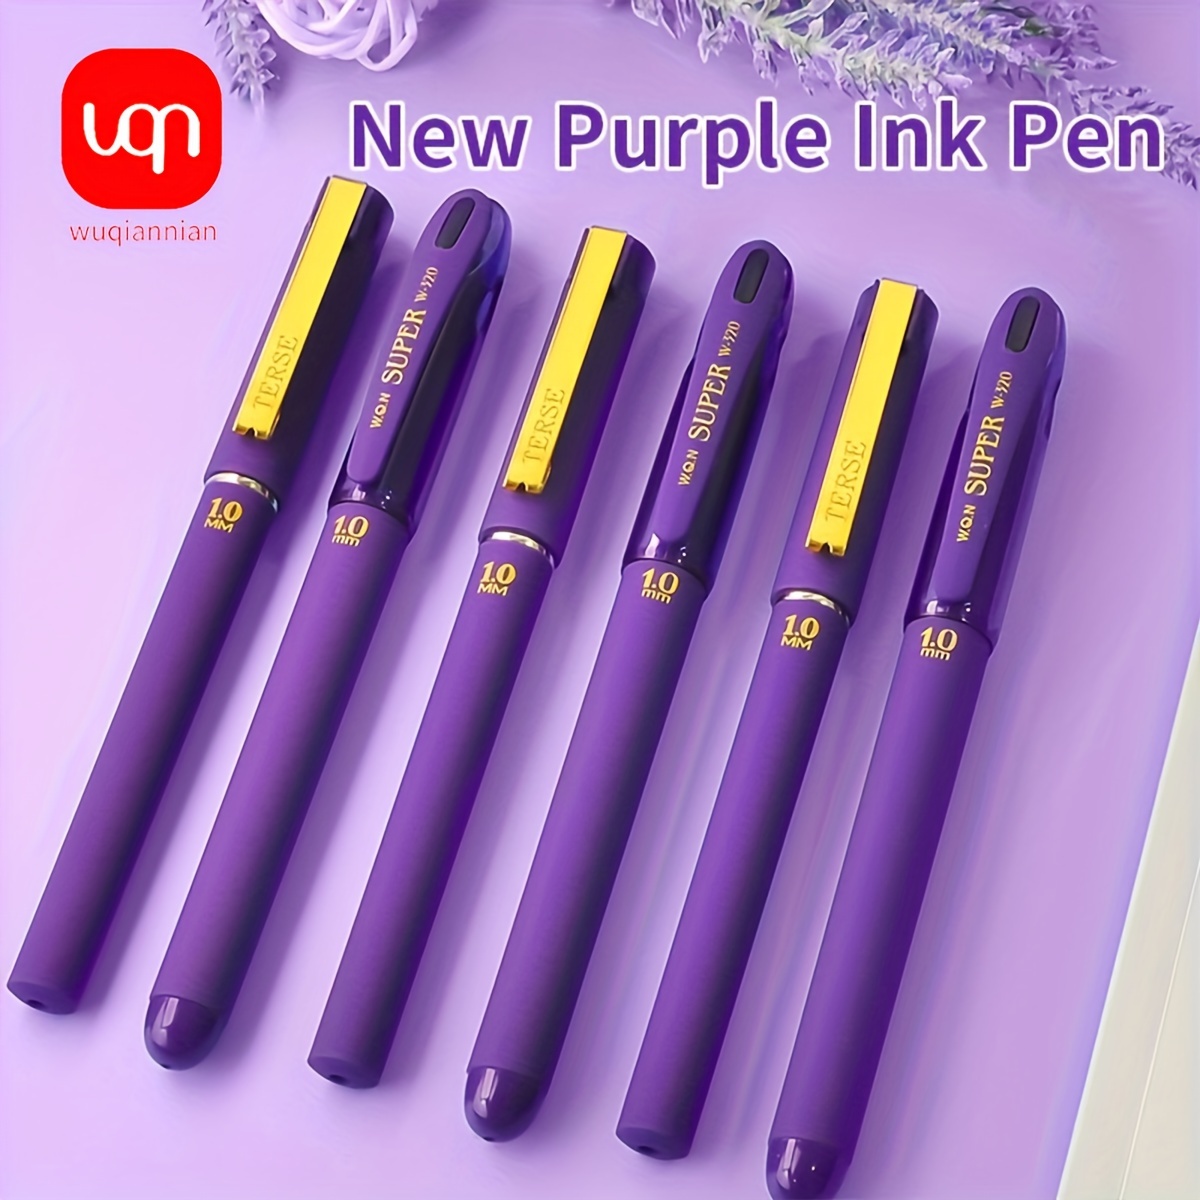 

[wqn] 3 Pieces/6 Pieces Of Unique Purple Rollerball Pen, Fast Drying Purple Ball Point Pen Stationery, Pen Tip 1.0mm, Purple Ink, Smooth Writing, Large Capacity Refill, Hard Pen Calligraphy Pen